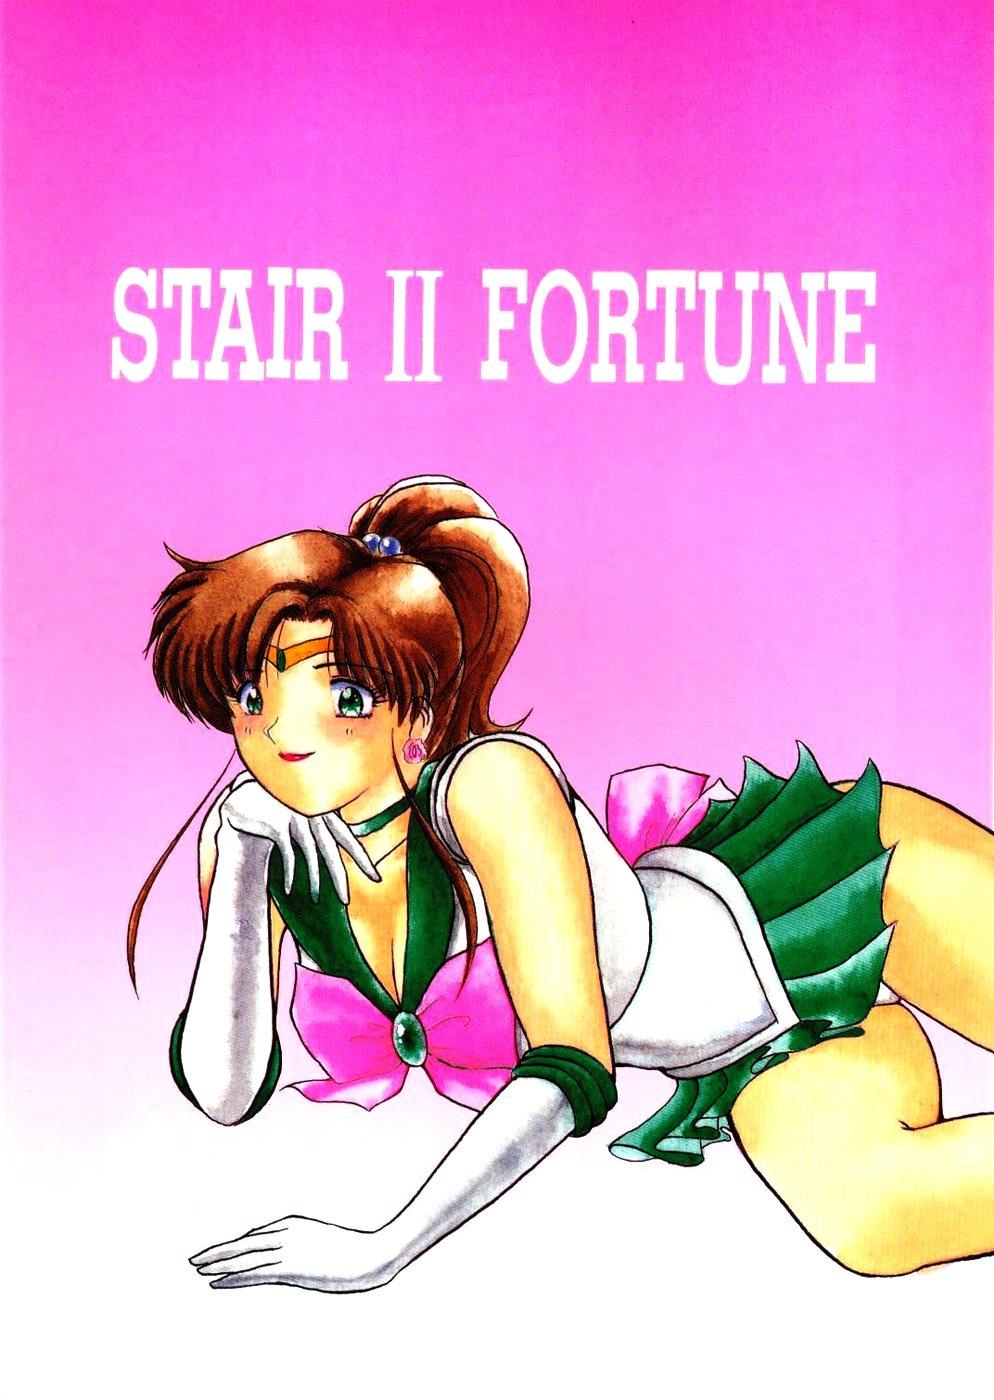 Best Blowjobs STAIR II FORTUNE - Sailor moon Shemales - Picture 1